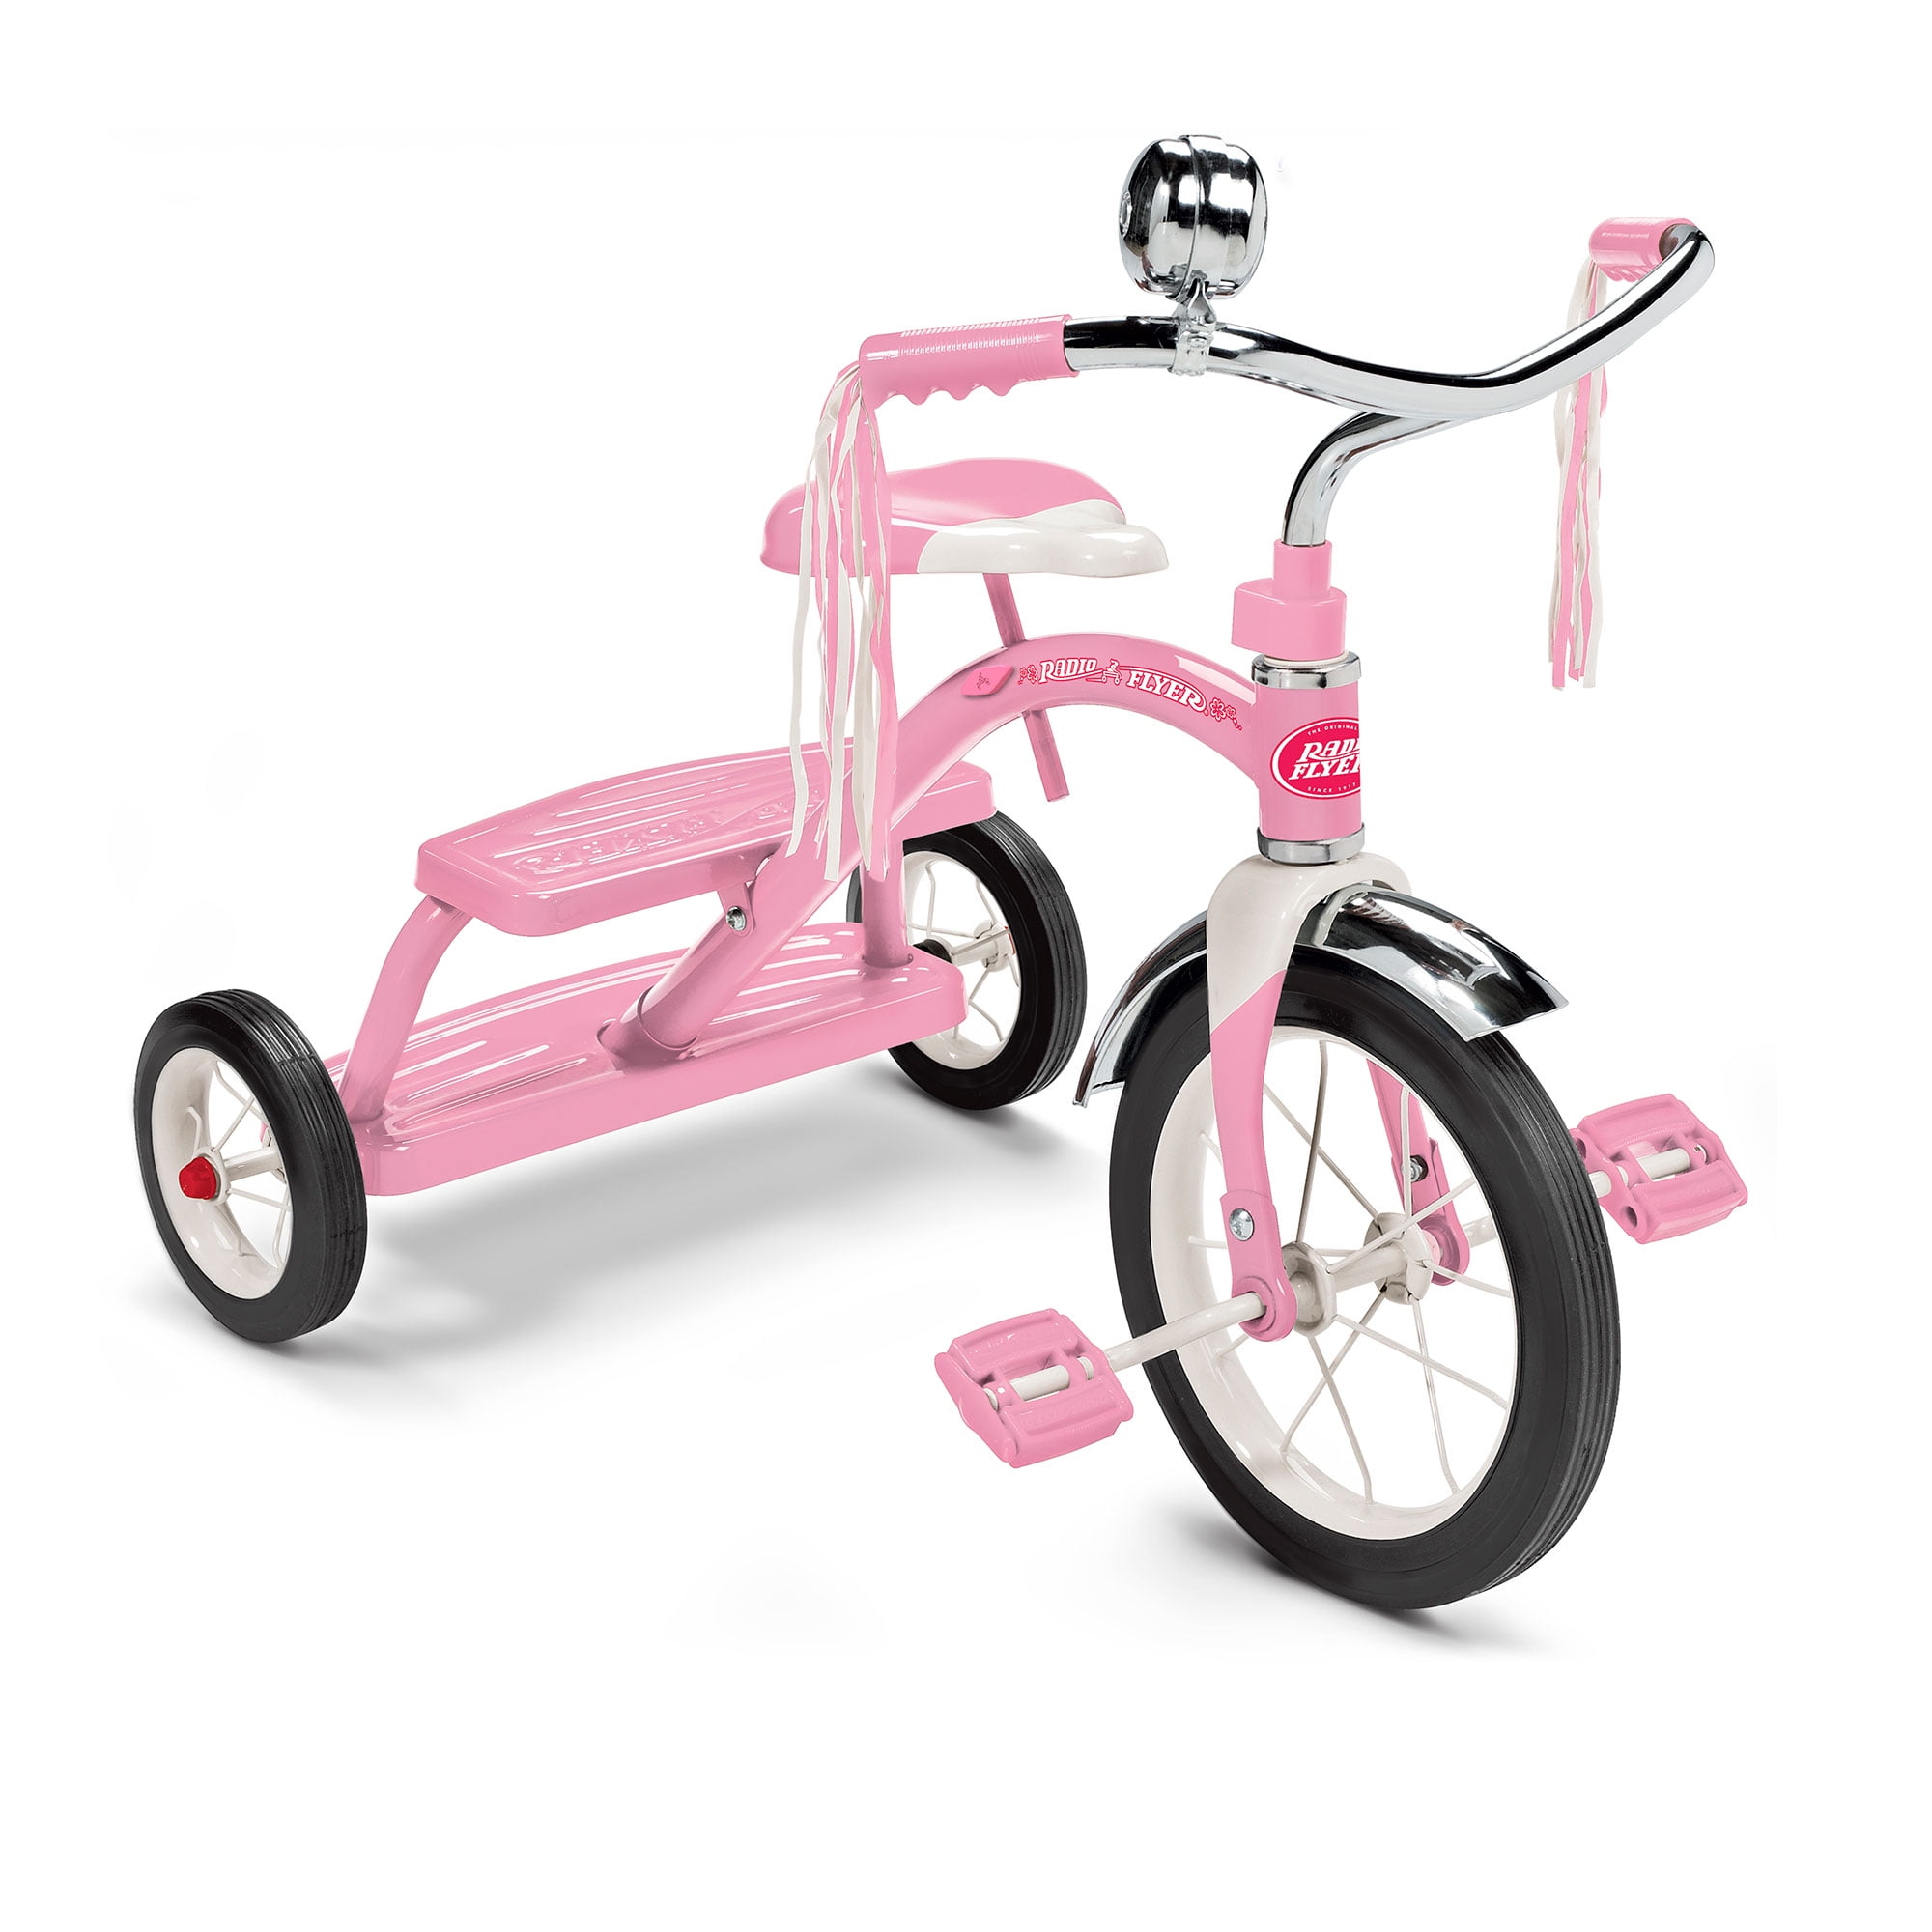 Radio Flyer Classic Dual Deck Tricycle - Pink